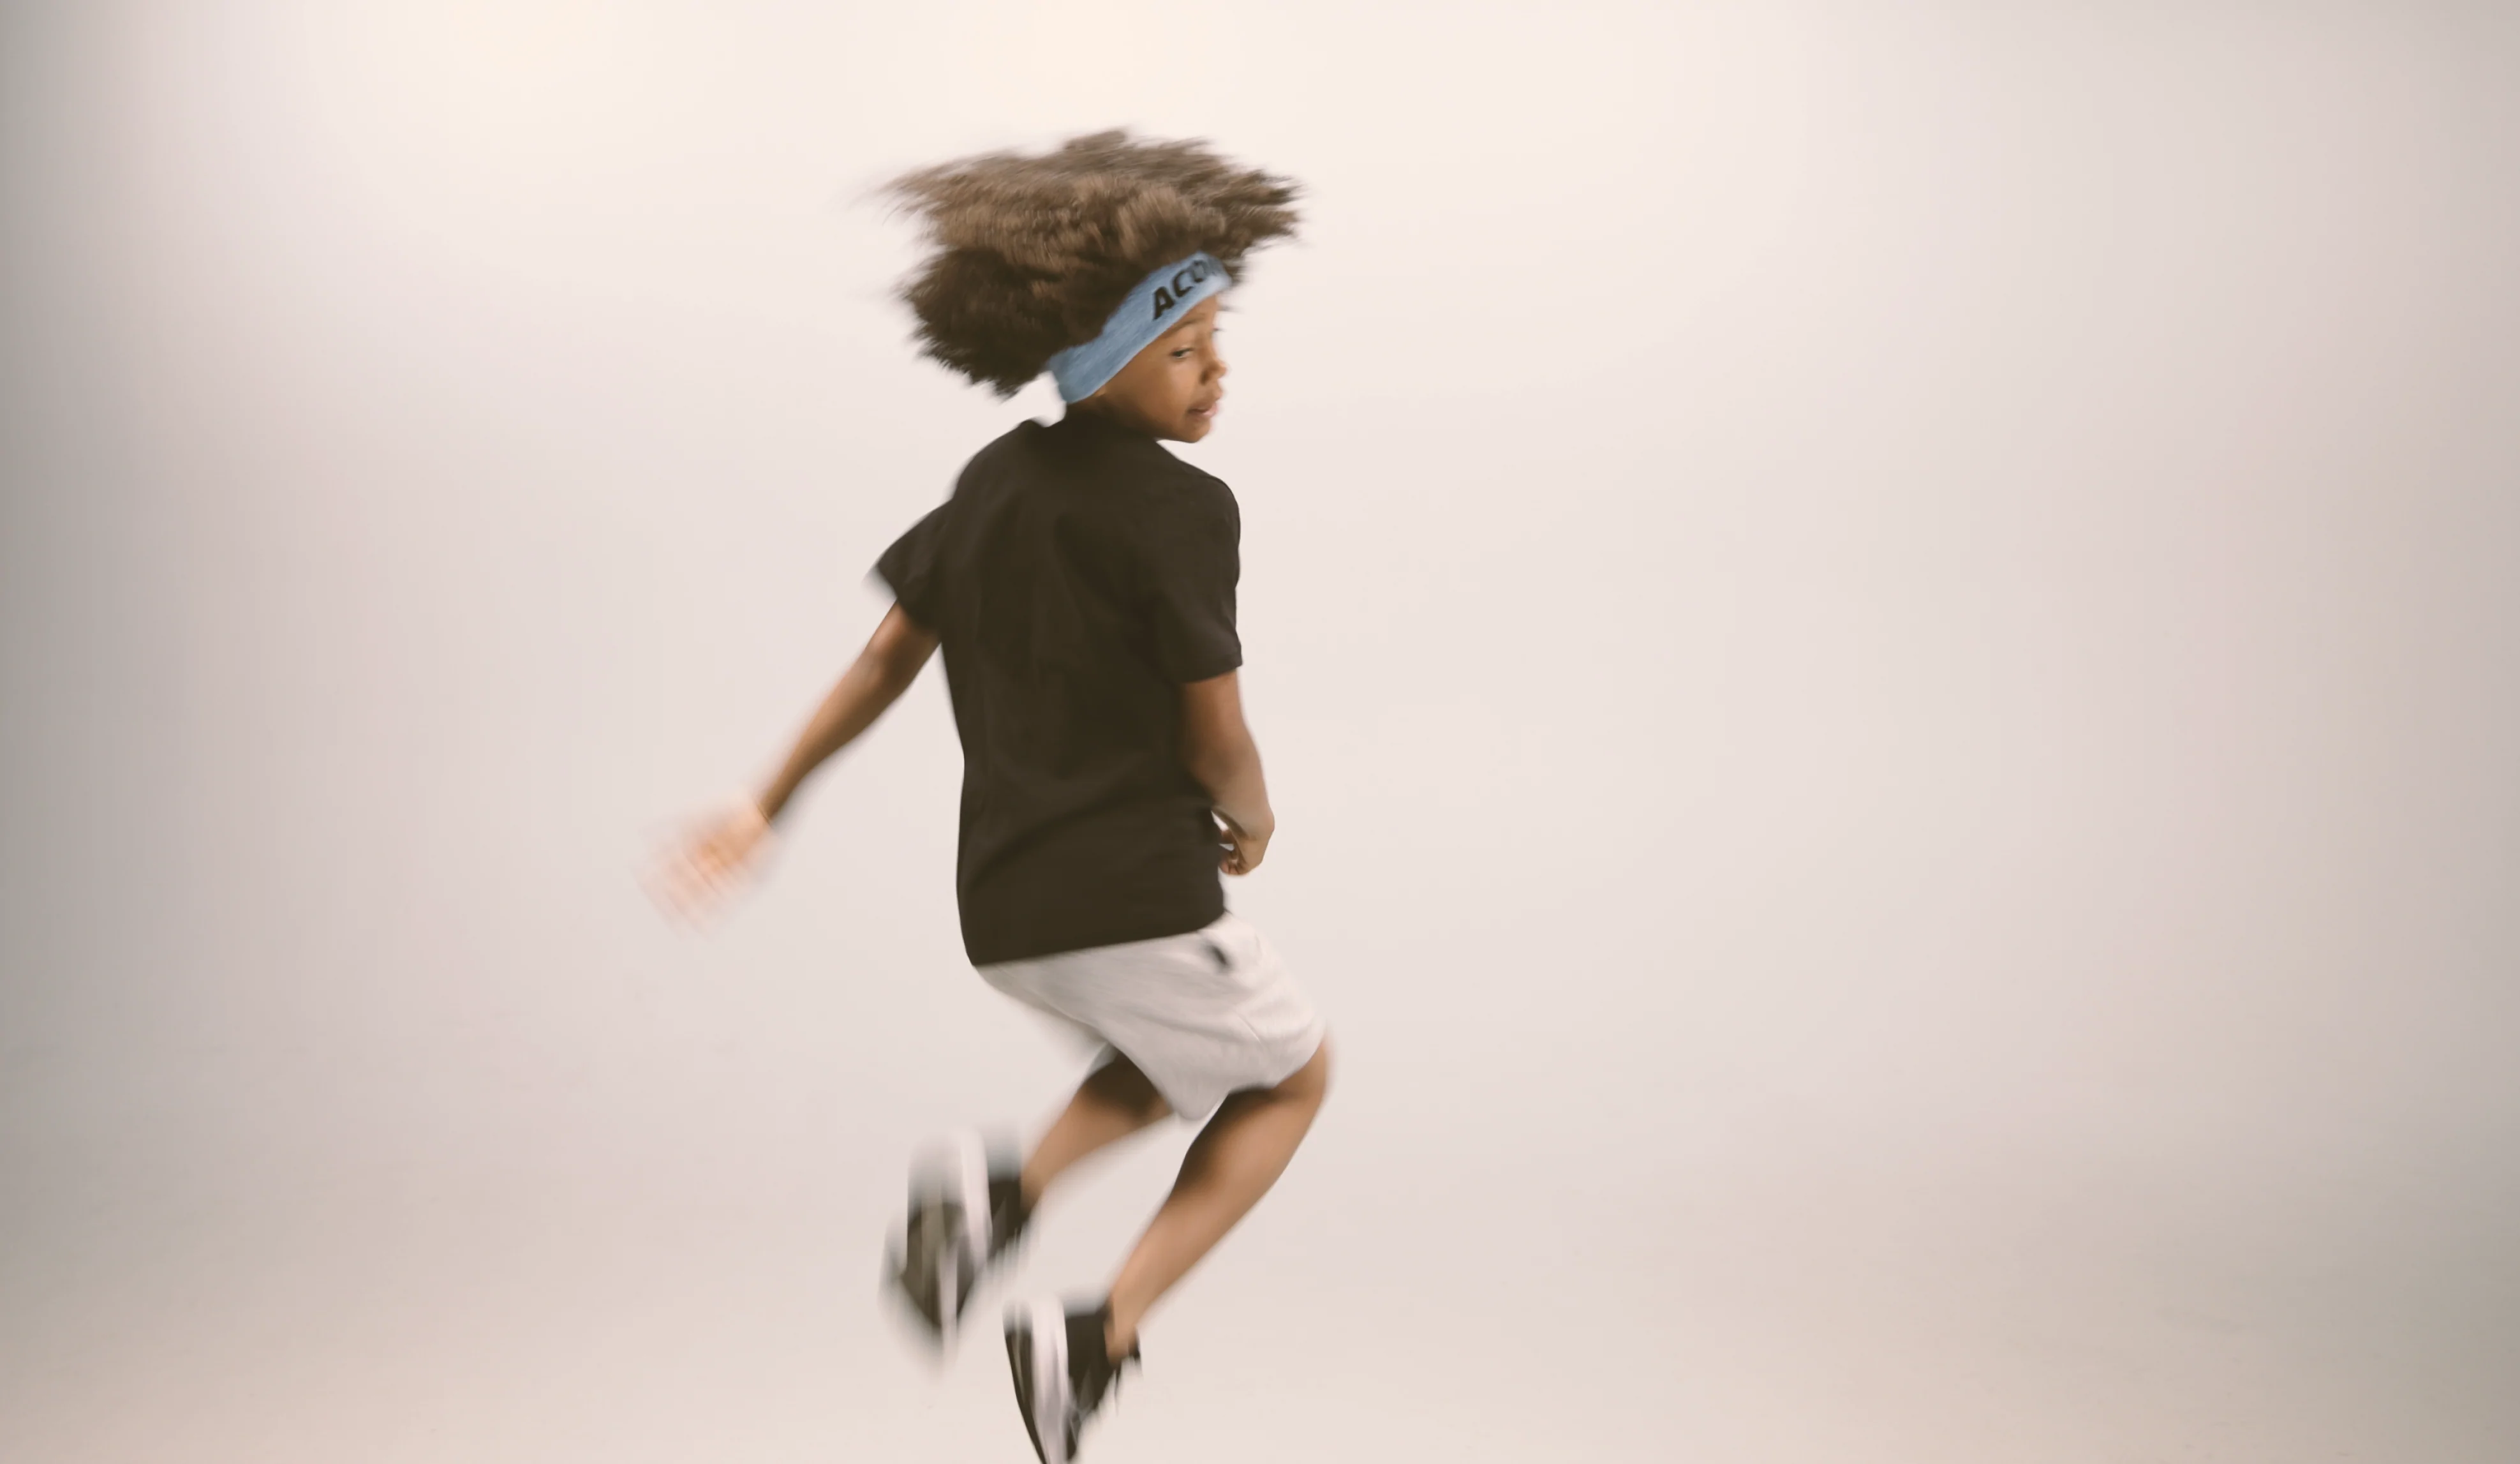 A jumping kid wearing an Acon headband, black t-shirt, white shorts and sneakers. Image is taken against beige background. 